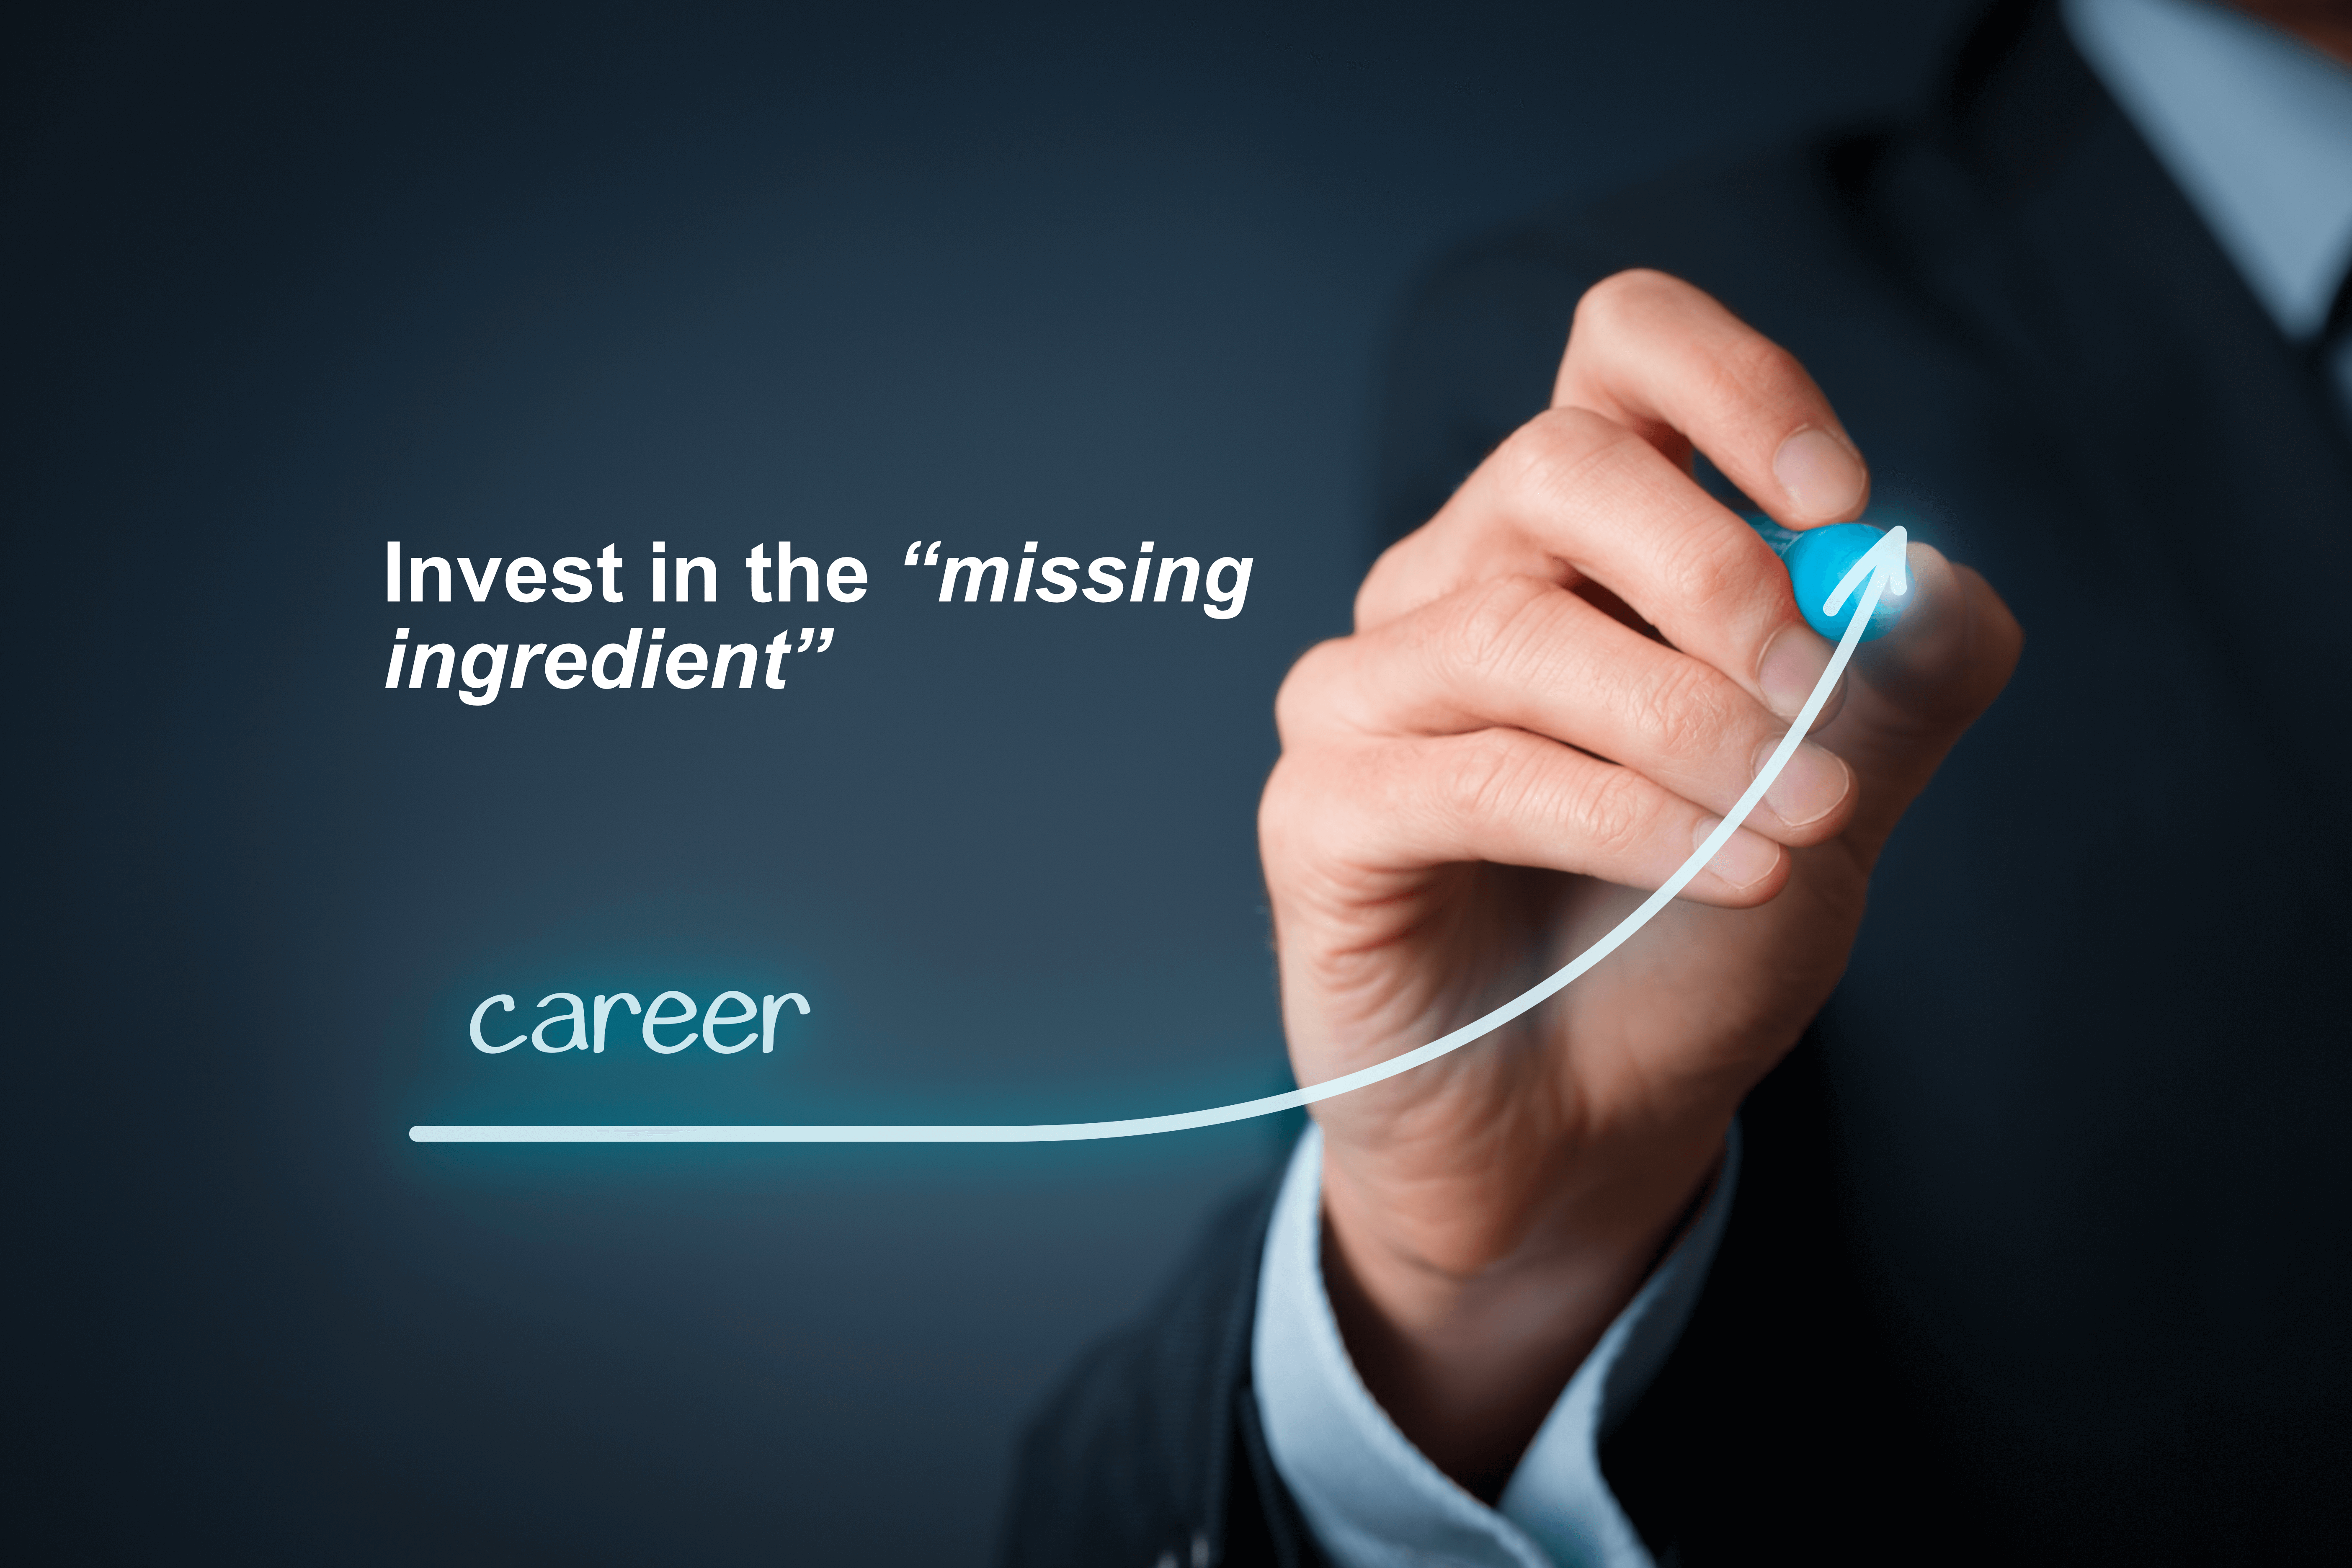 Investing in the missing ingedient for career development